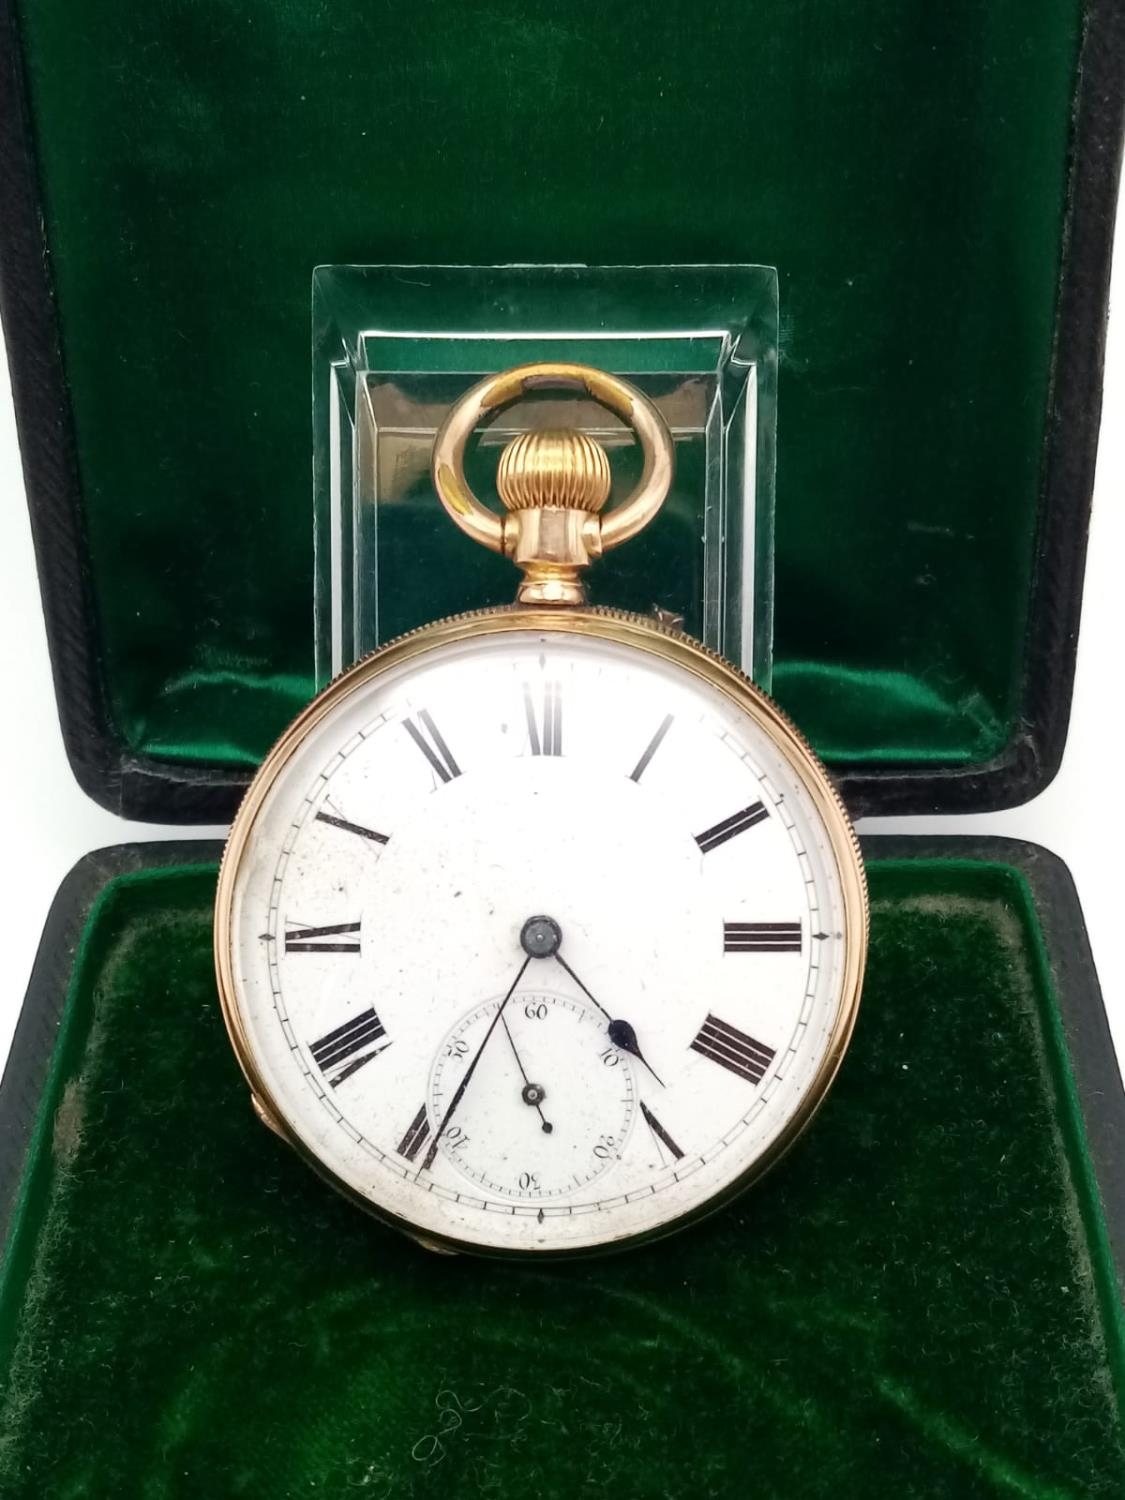 A GOLD PLATED POCKET WATCH WITH TOP WIND, WHITE FACE WITH ROMAN NUMERALS PROBABLY EARLY 20TH